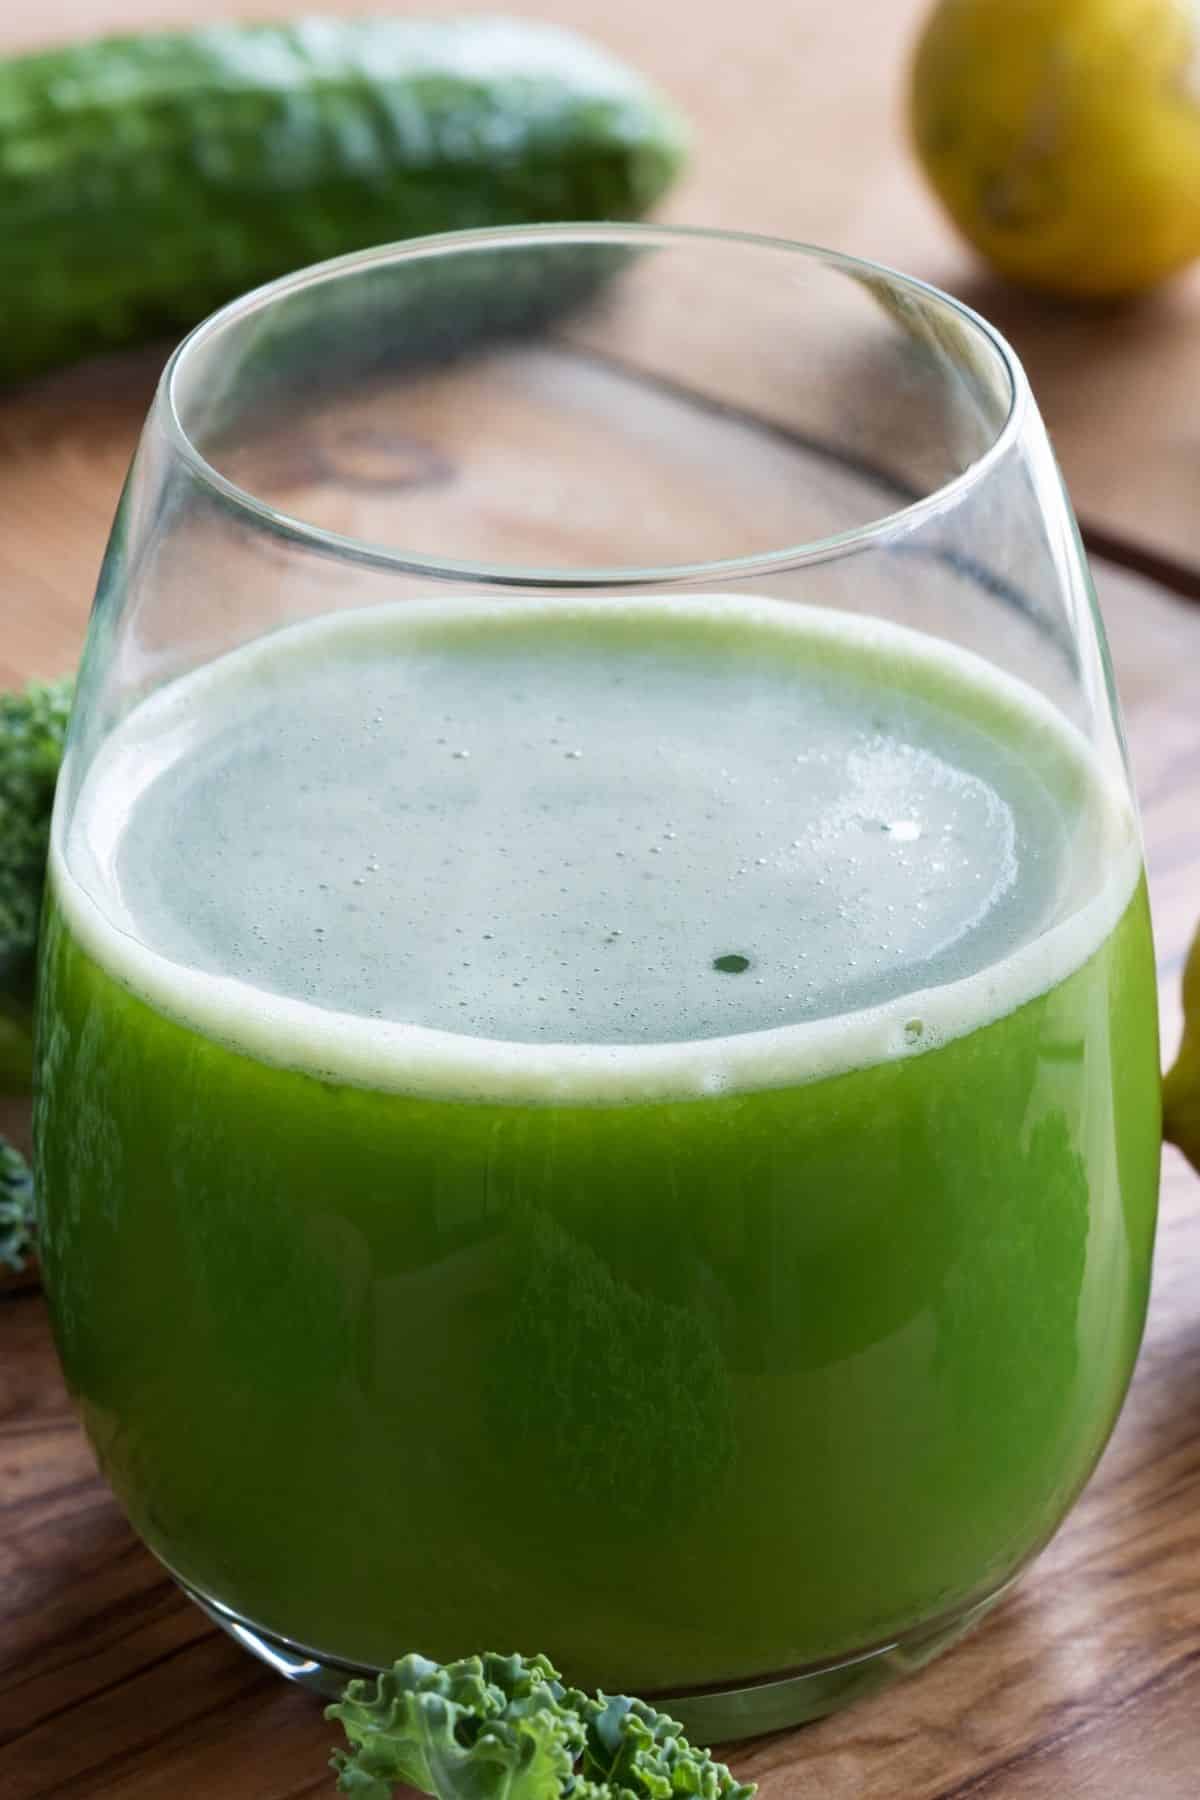 kale juice in glass on table